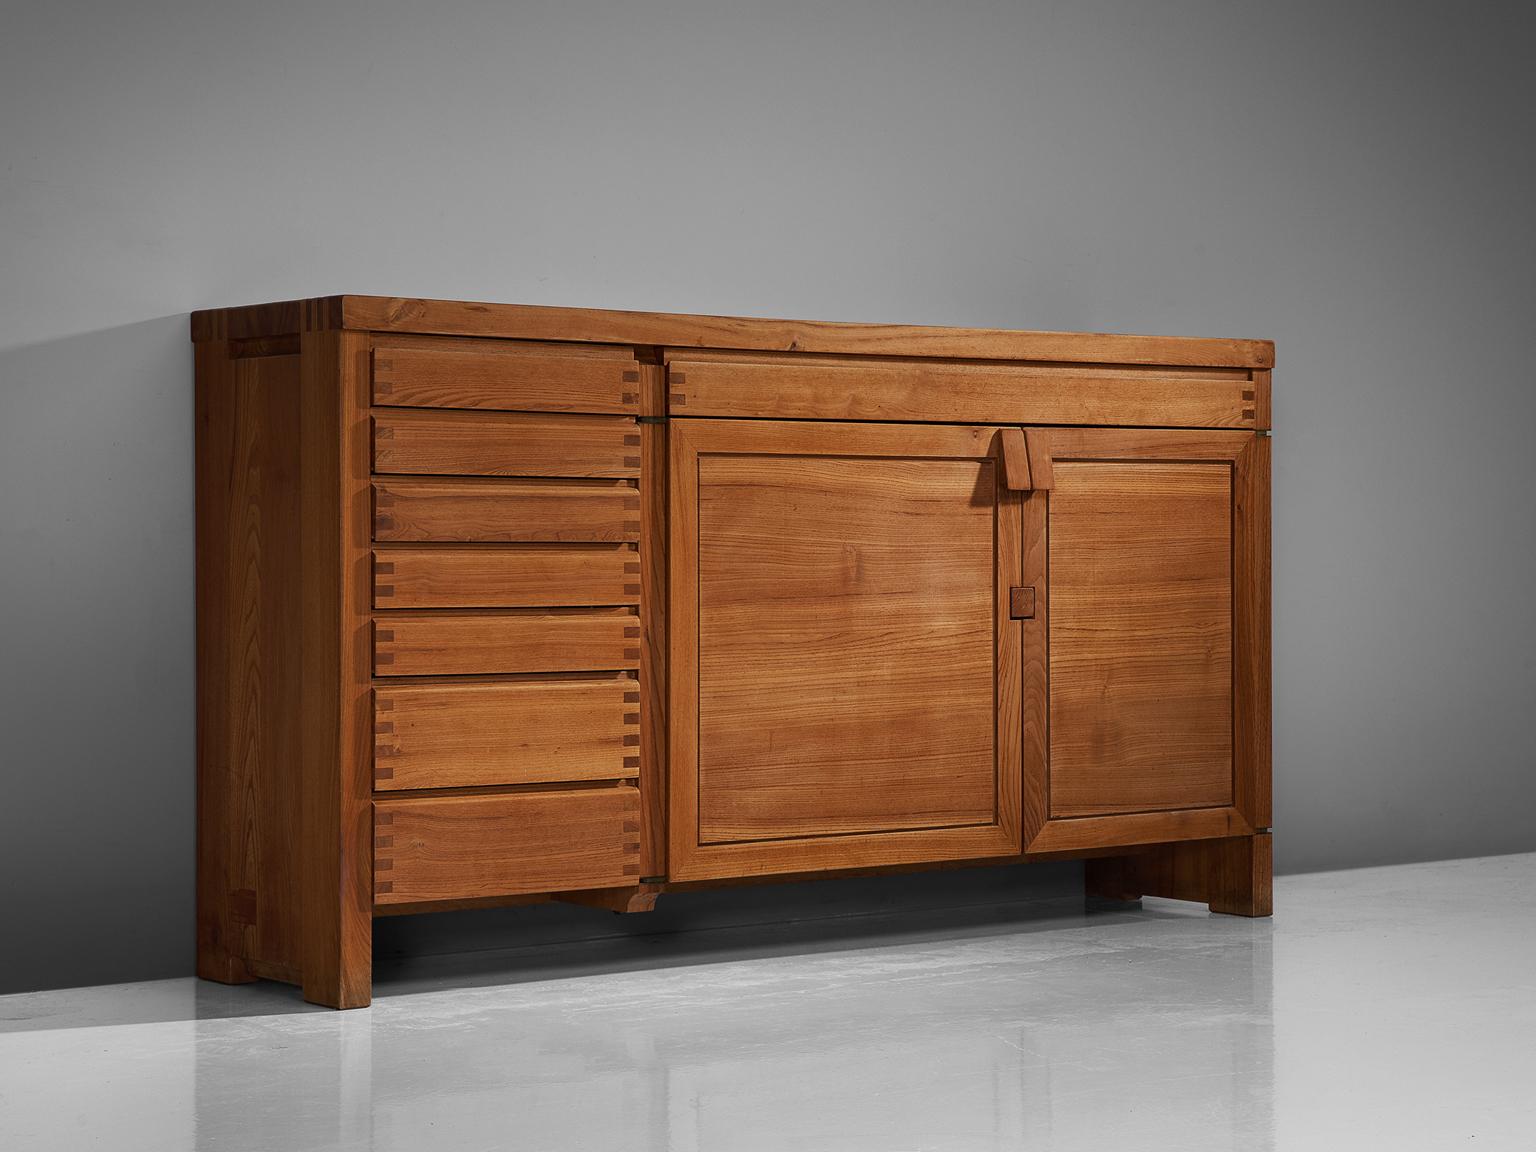 Pierre Chapo, sideboard, two-door and eight drawer sideboard model R13A, elm, France, 1964.

This exquisitely crafted credenza combines a simplified yet complex design combined with nifty, solid construction details that characterize Chapo's work.